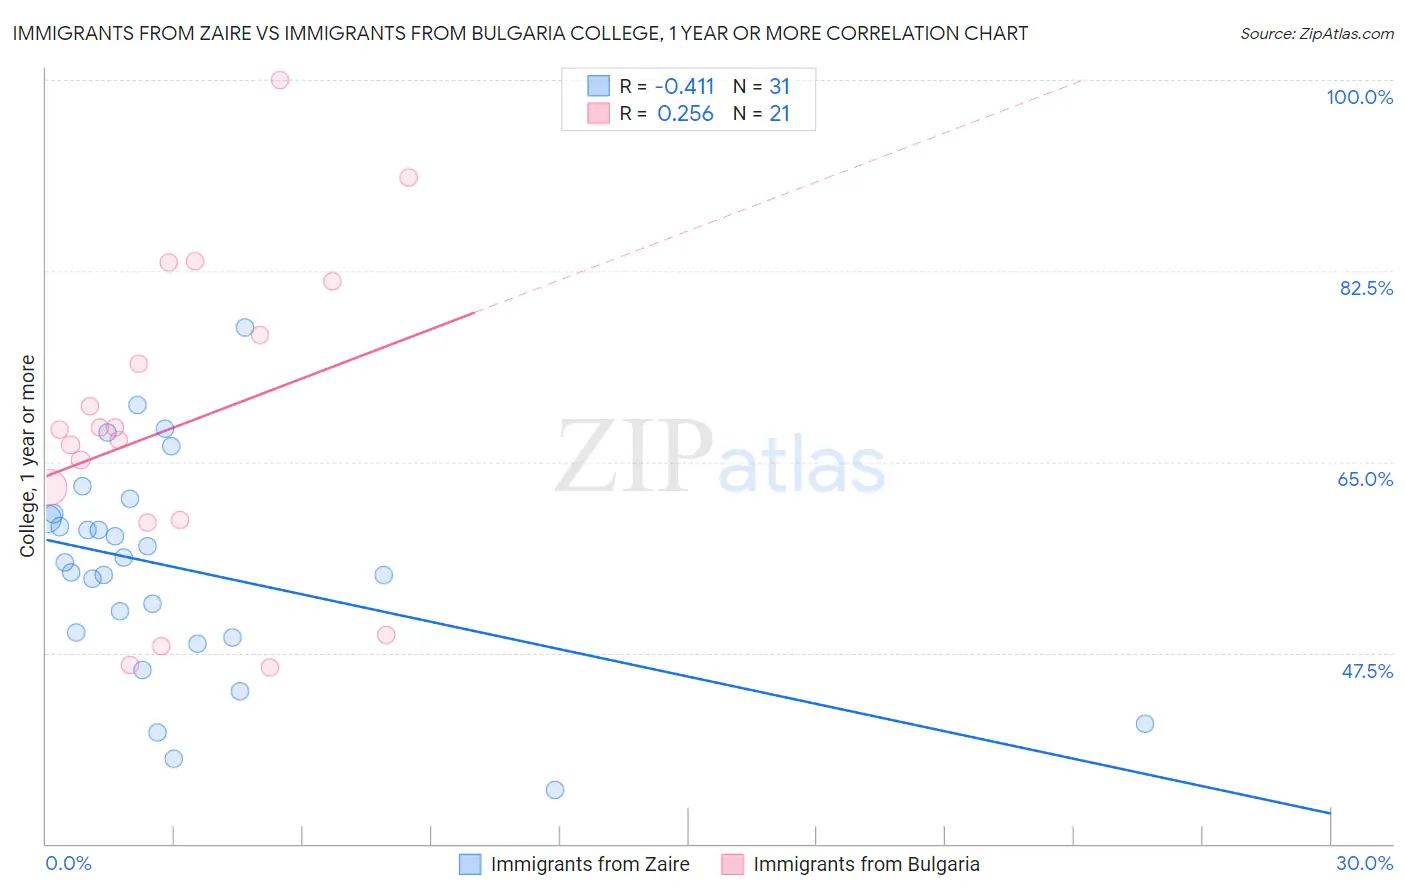 Immigrants from Zaire vs Immigrants from Bulgaria College, 1 year or more